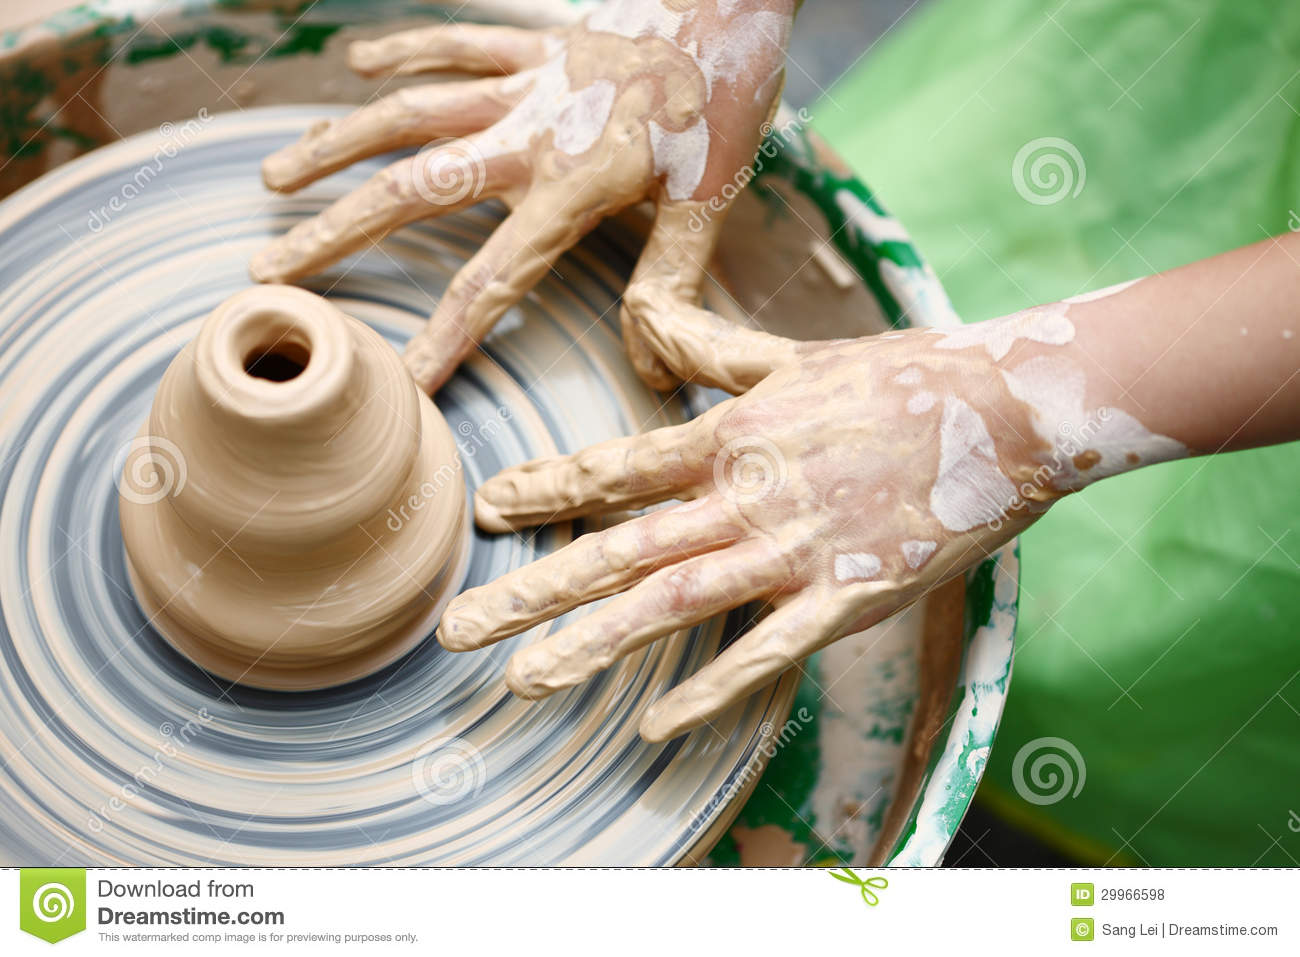 Child Hands Making Pottery Royalty Free Stock Photos   Image  29966598